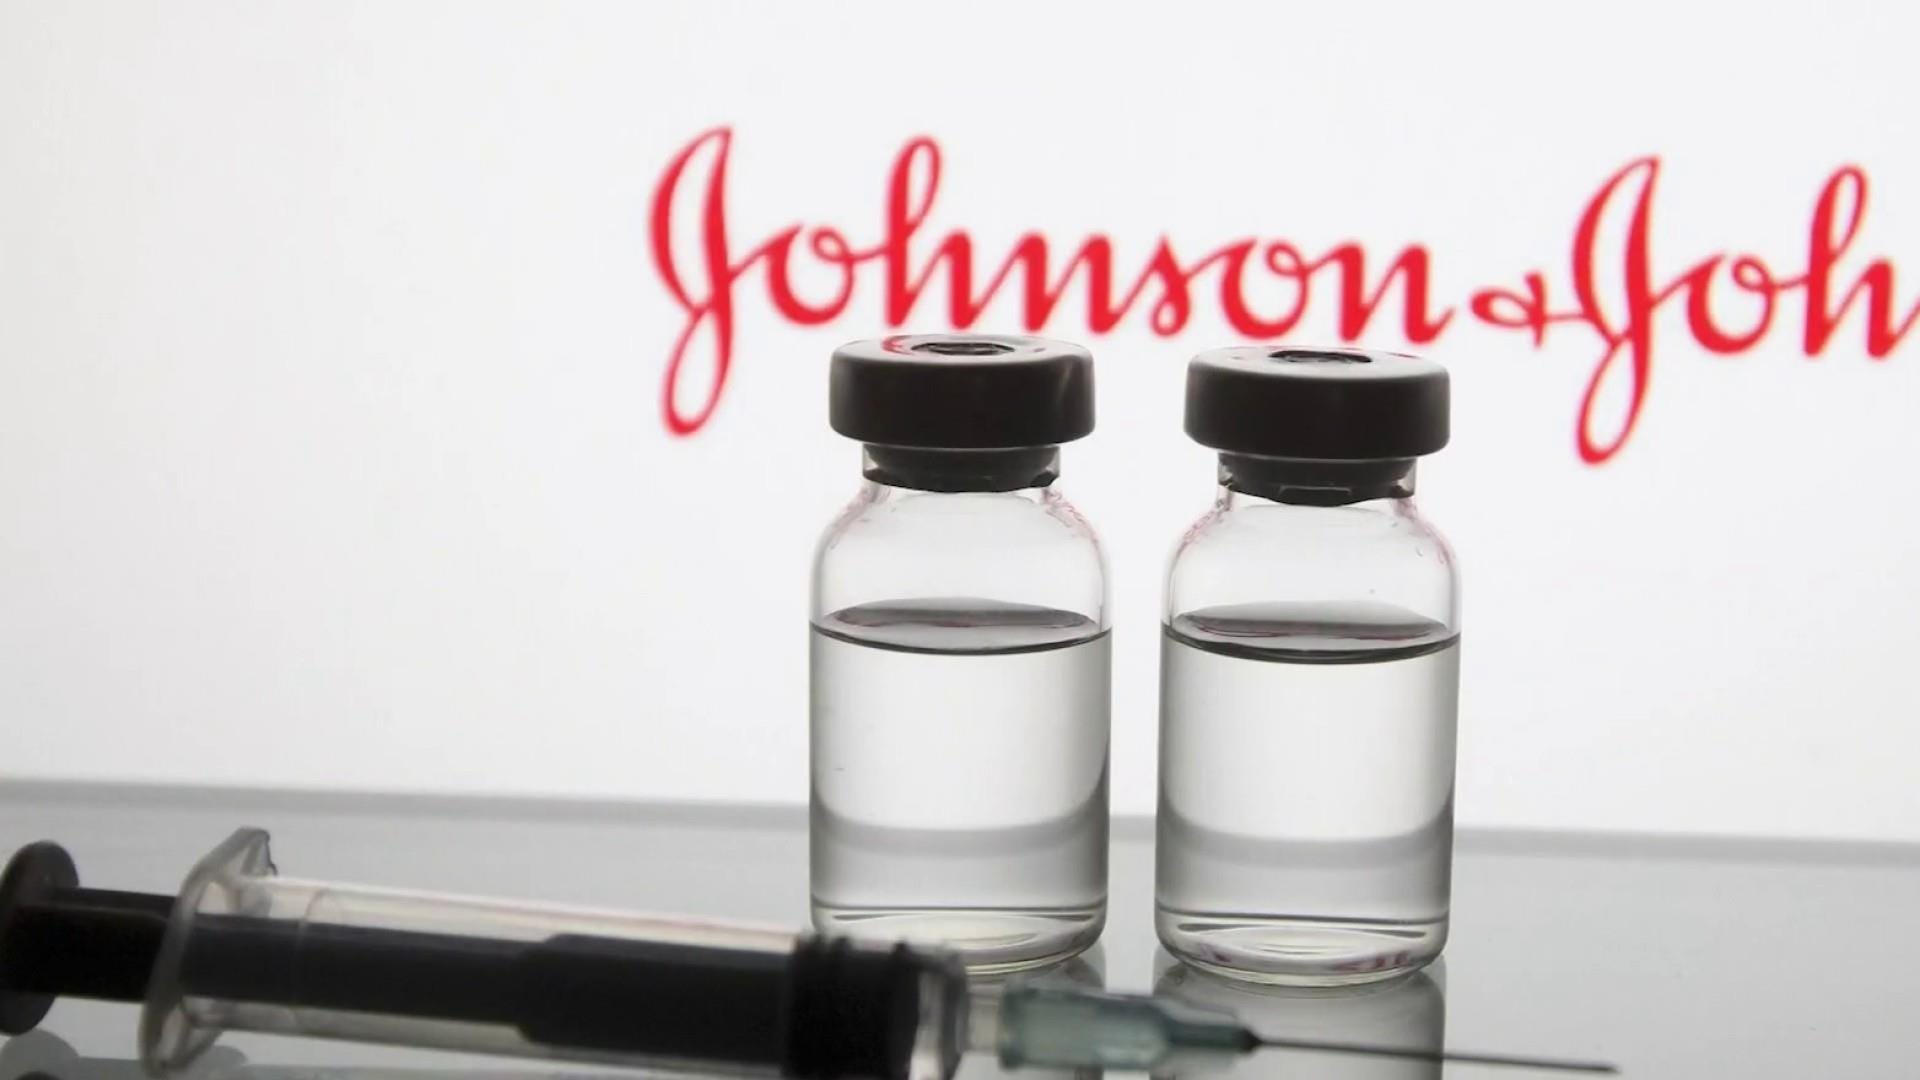 What S Happening With The Johnson Johnson Vaccine In Washington By Washington State Department Of Health Public Health Connection Apr 2021 Medium